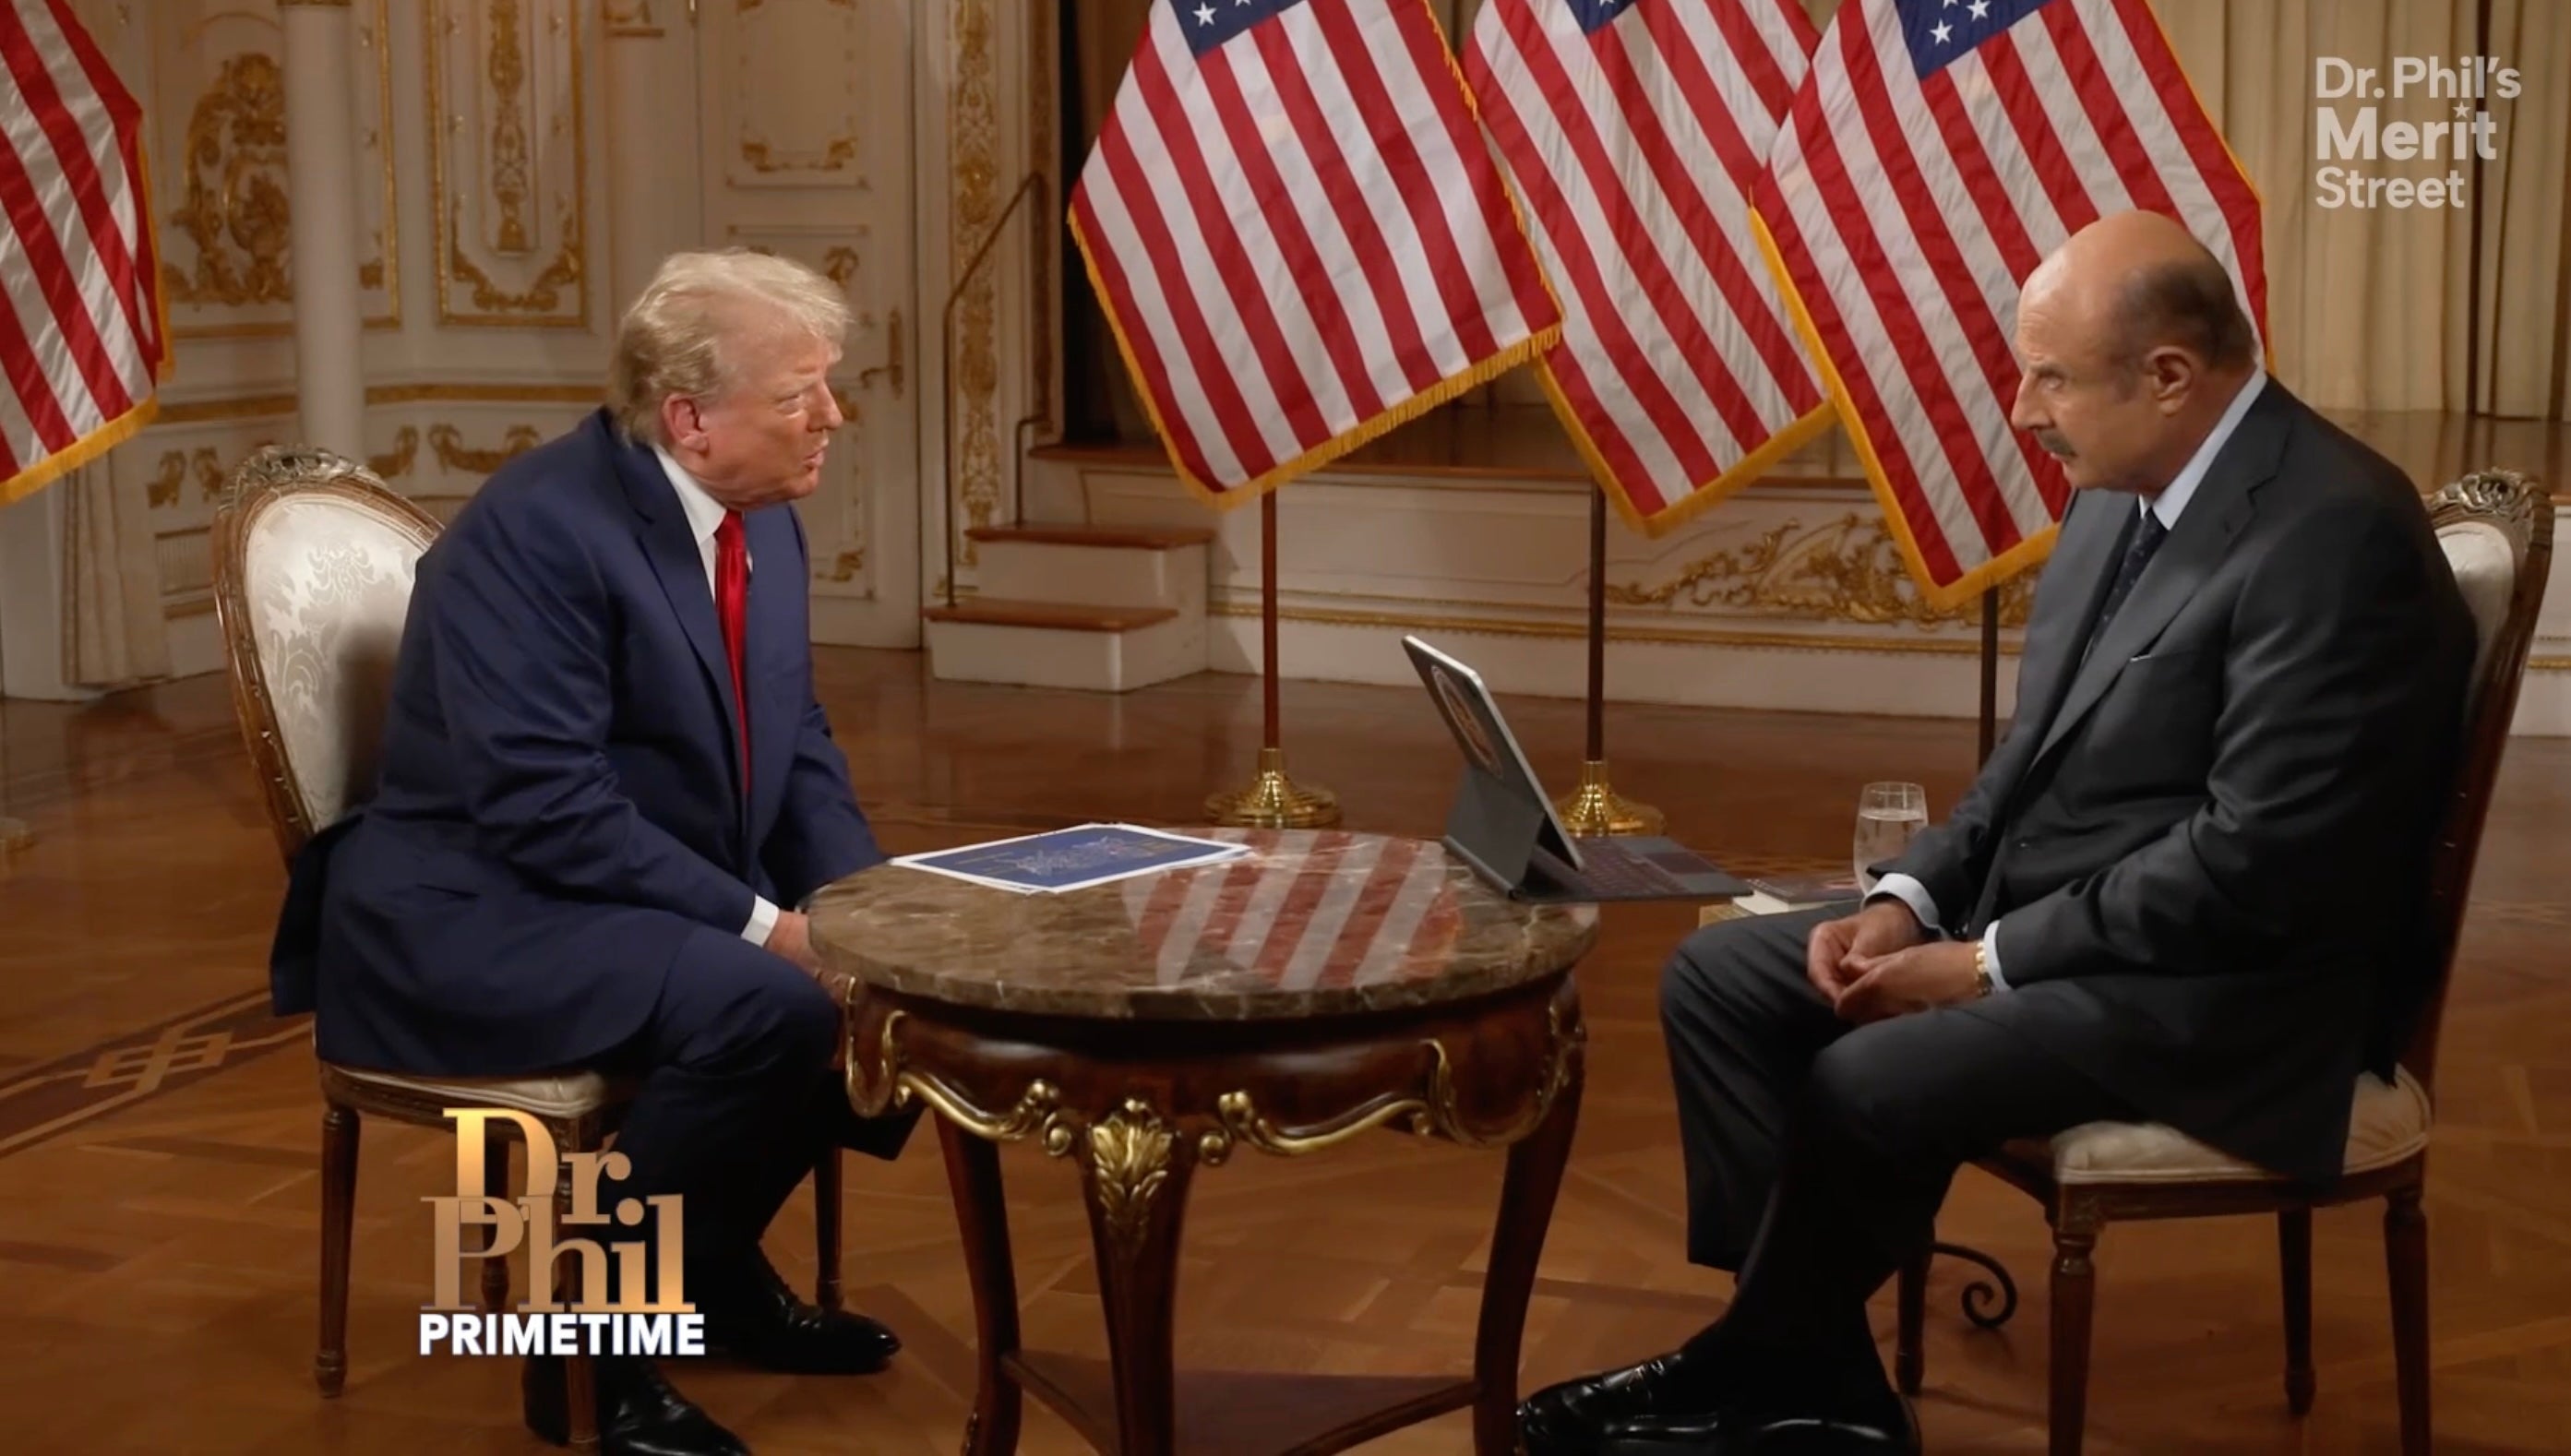 Donald Trump and Dr. Phil discuss several topics including the election and his family during an interview on June 6.